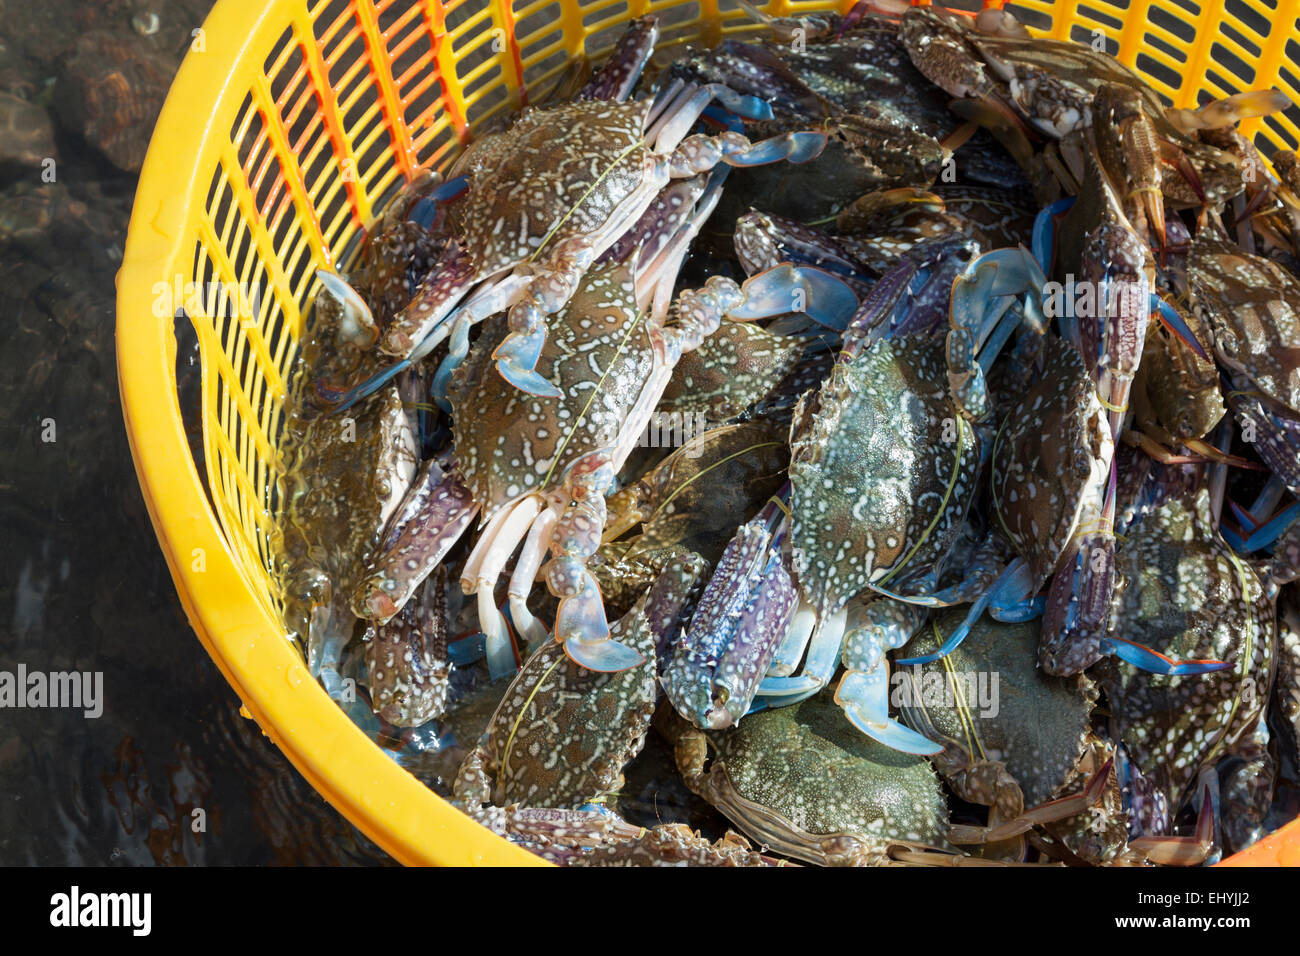 Crab Market in Kep, Cambodia. Traditional occupation for make a living. Crab in basket ready for sale. Stock Photo